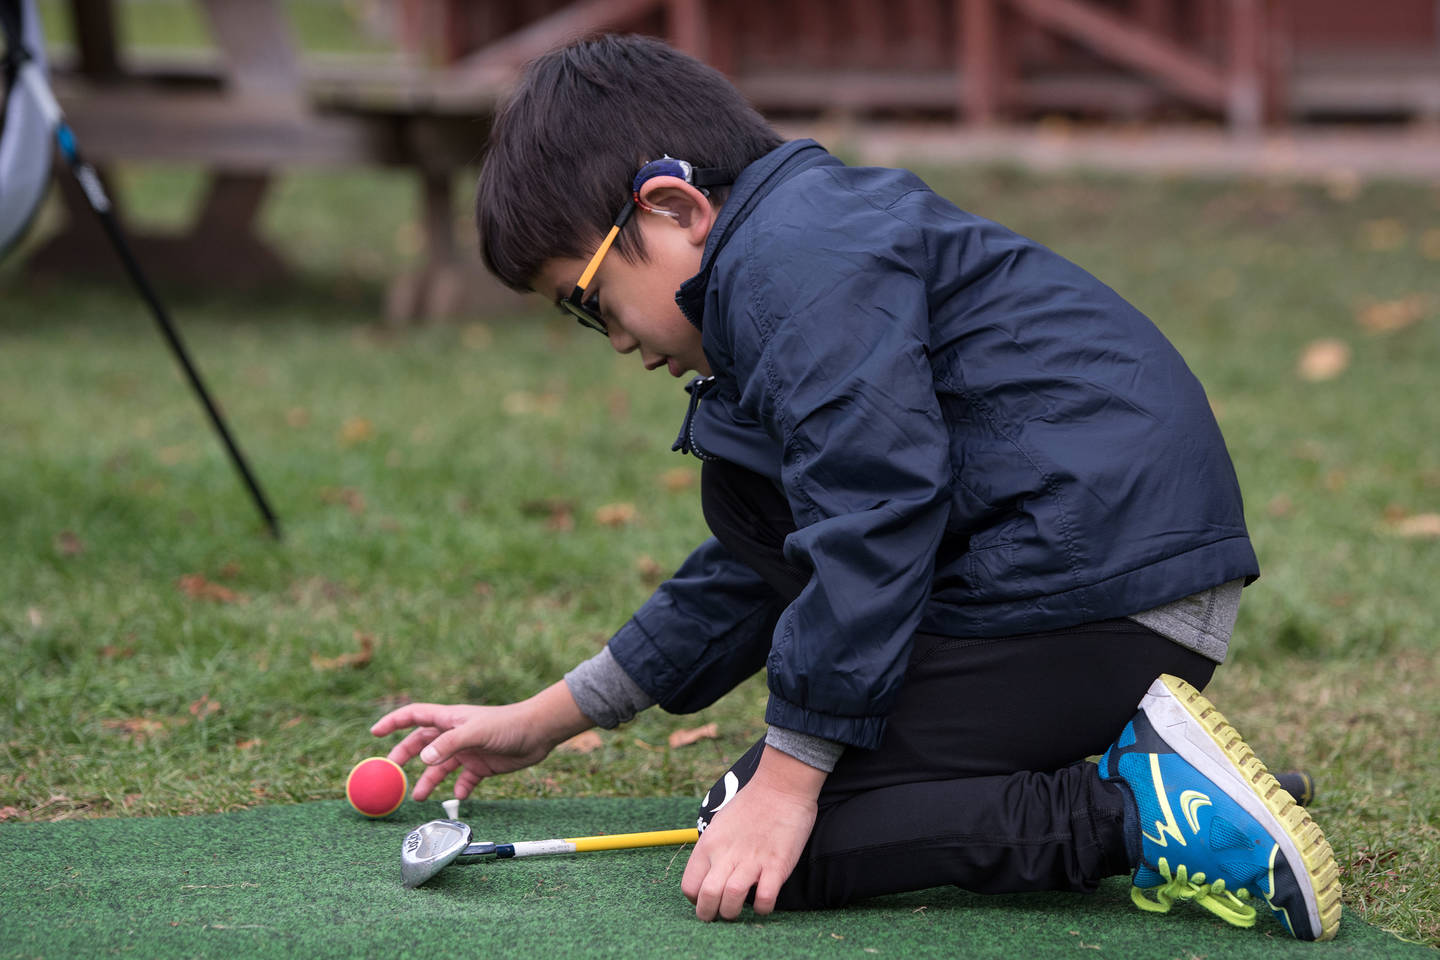 Young boy with hearing impairment putting golf ball on tee.